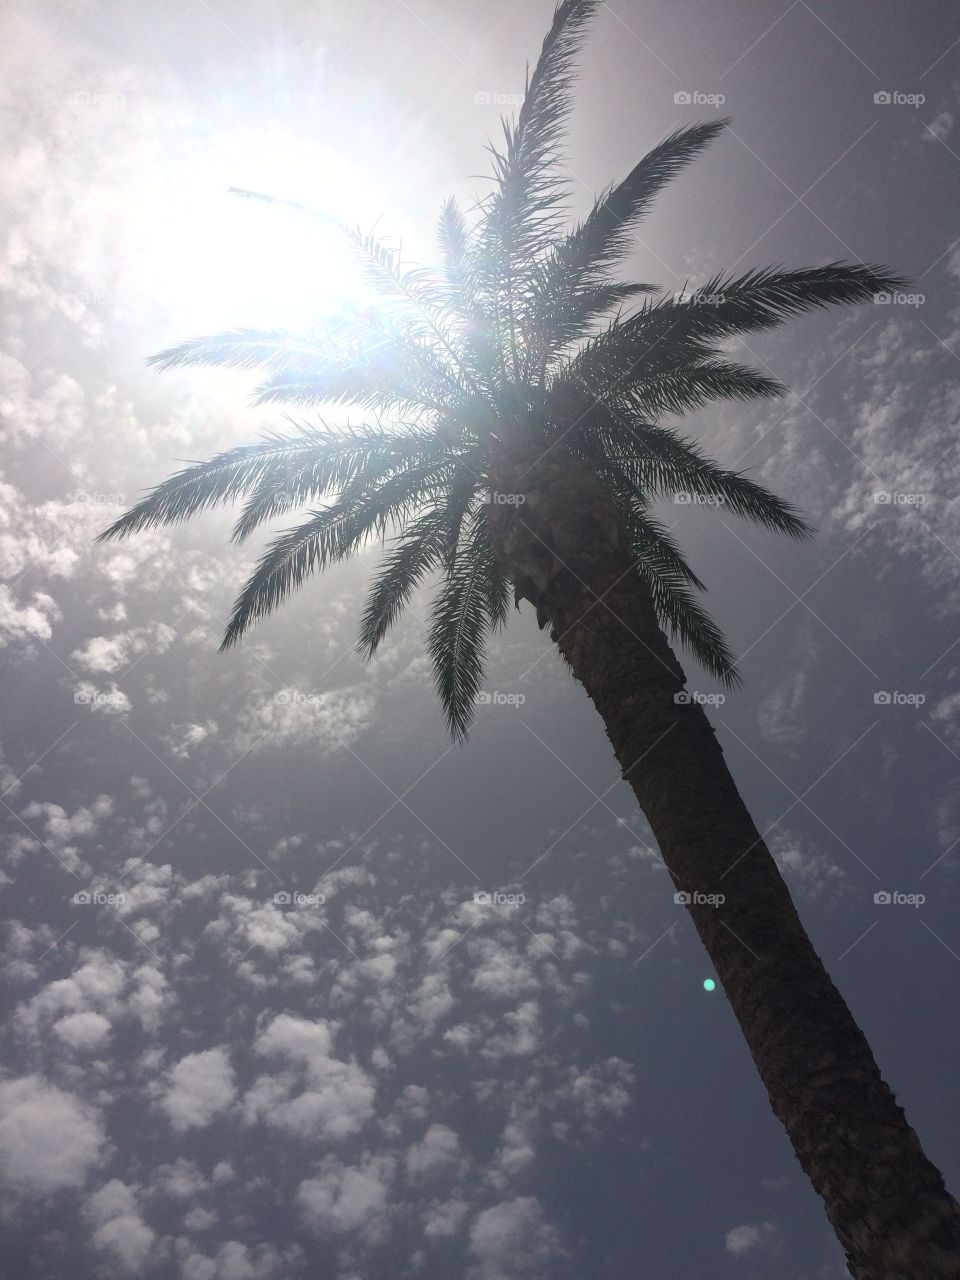 Palm Tree in Summer. Taken on an iPhone 5s